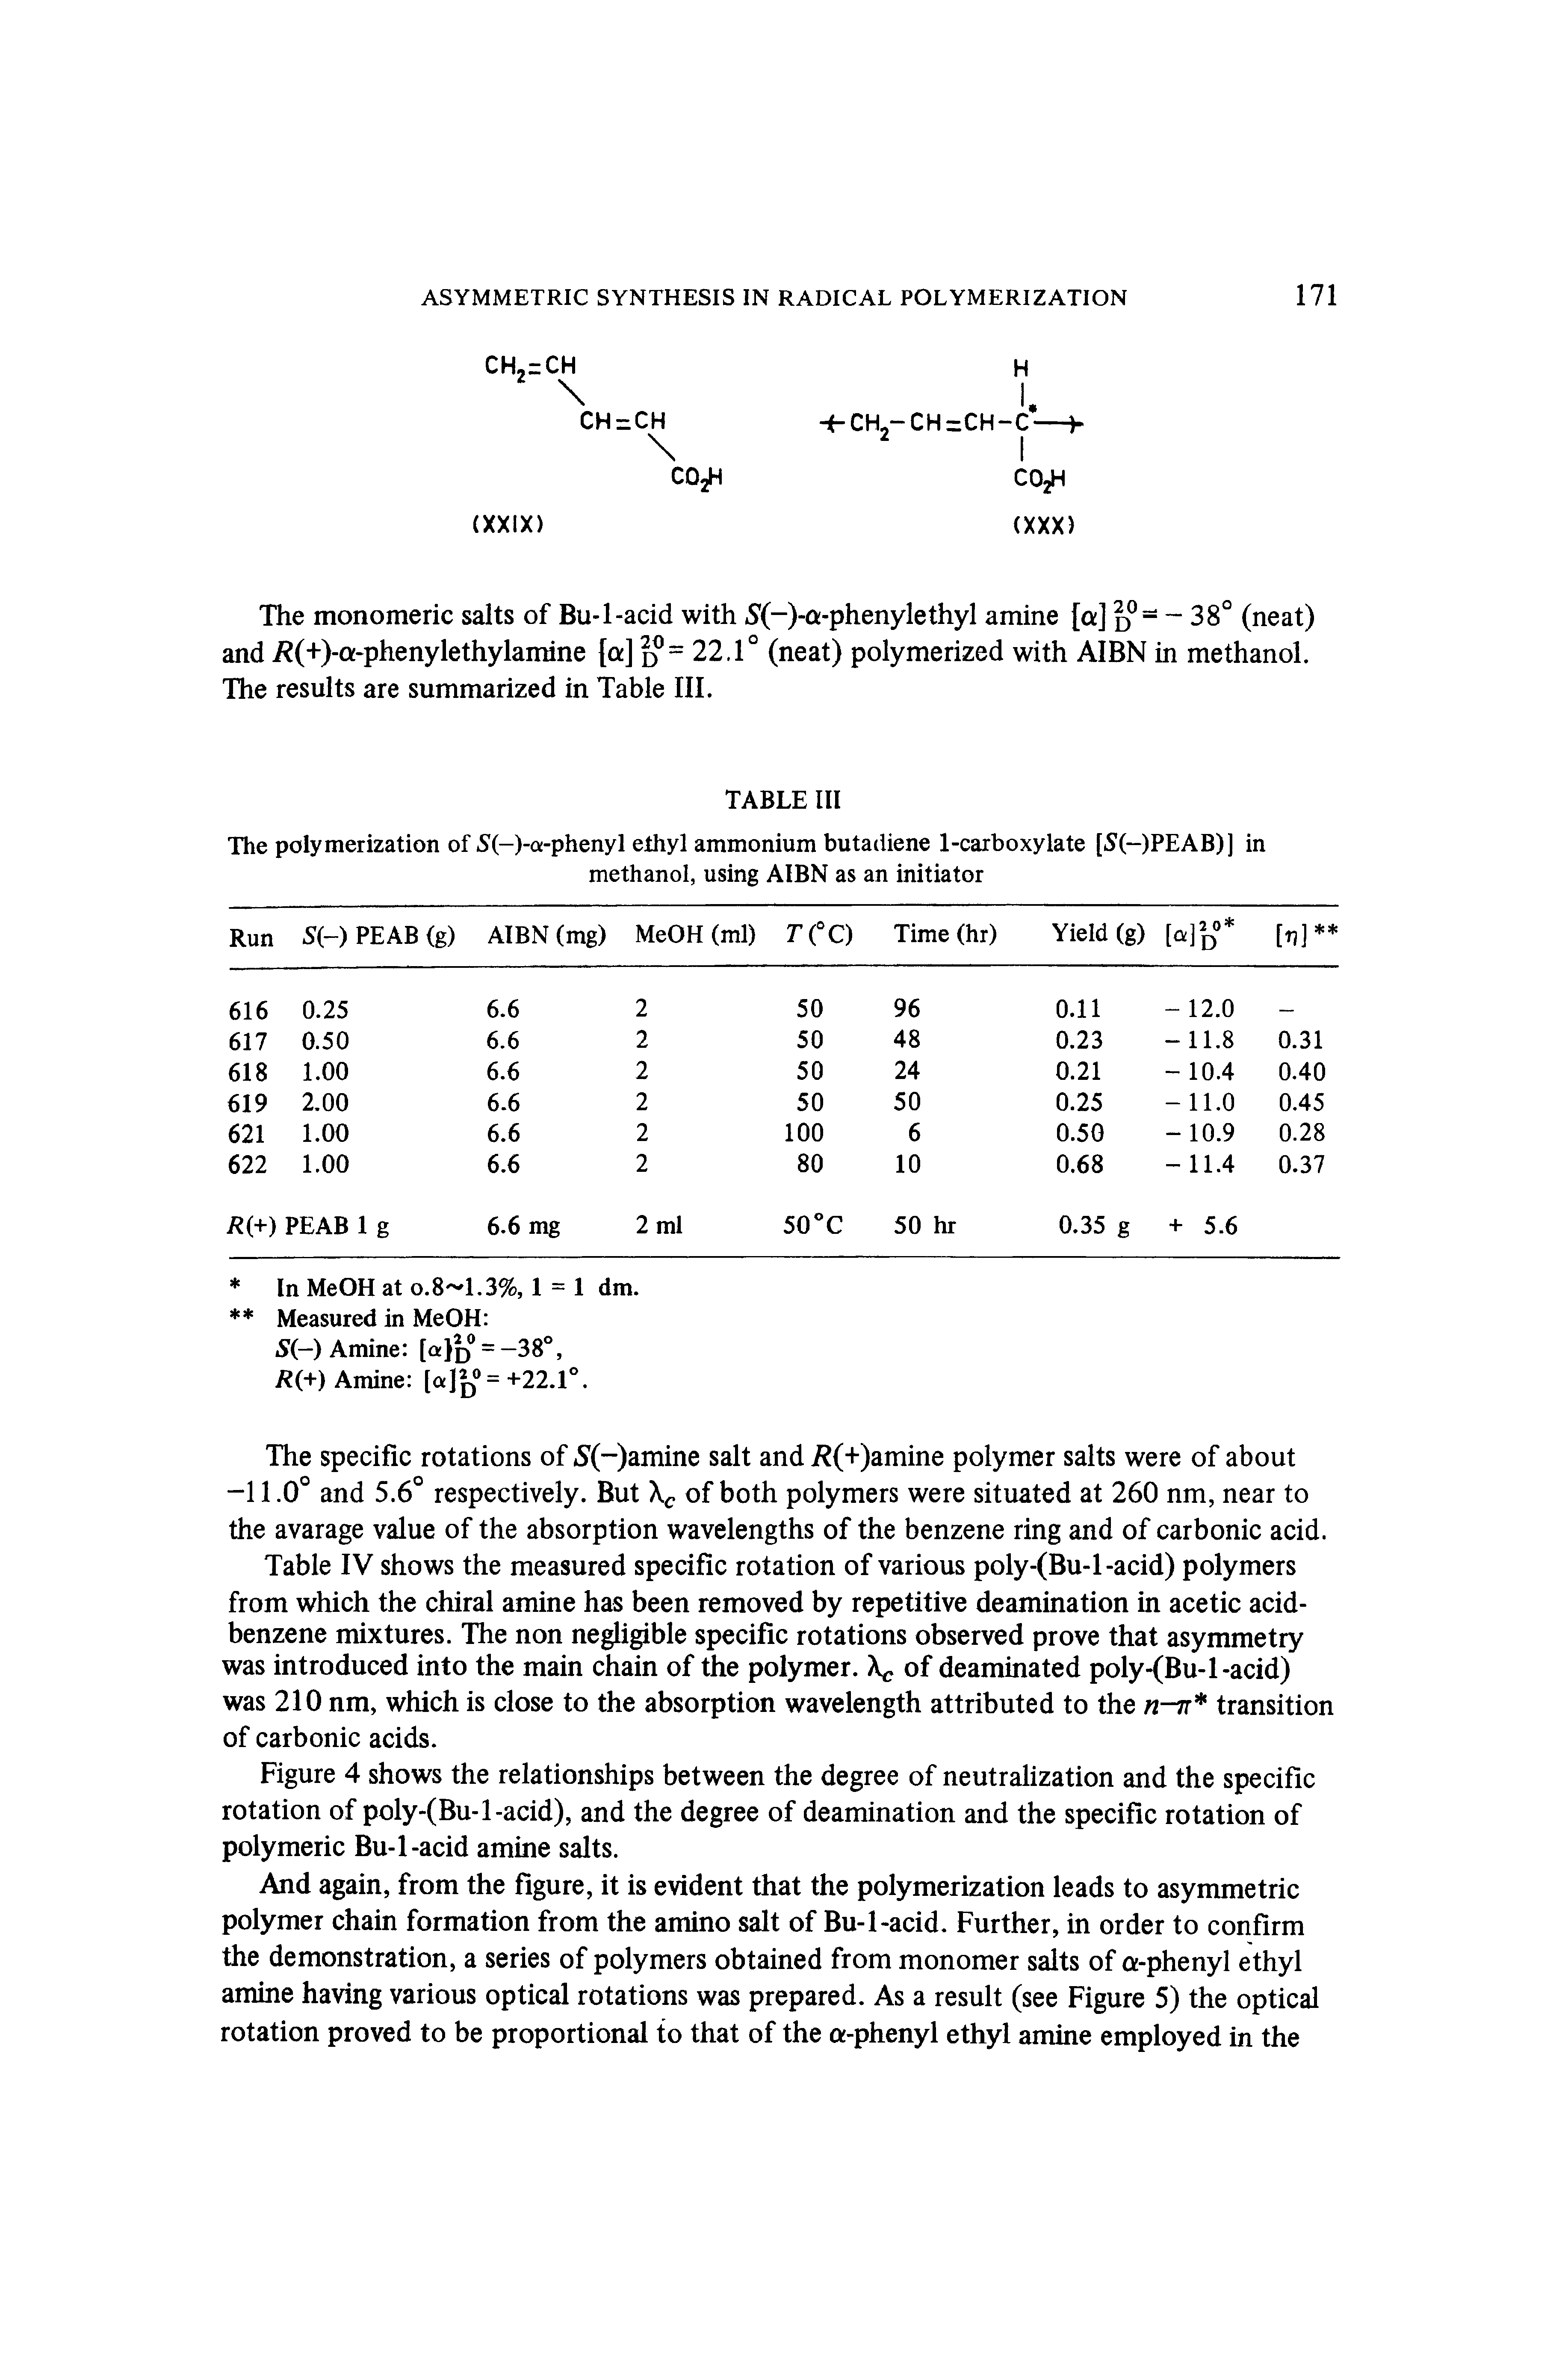 Table IV shows the measured specific rotation of various poly-(Bu-l-acid) polymers from which the chiral amine has been removed by repetitive deamination in acetic acid-benzene mixtures. The non negligible specific rotations observed prove that asymmetry was introduced into the main chain of the polymer. of deaminated poly-(Bu-l-acid) was 210 nm, which is close to the absorption wavelength attributed to the n-n transition of carbonic acids.